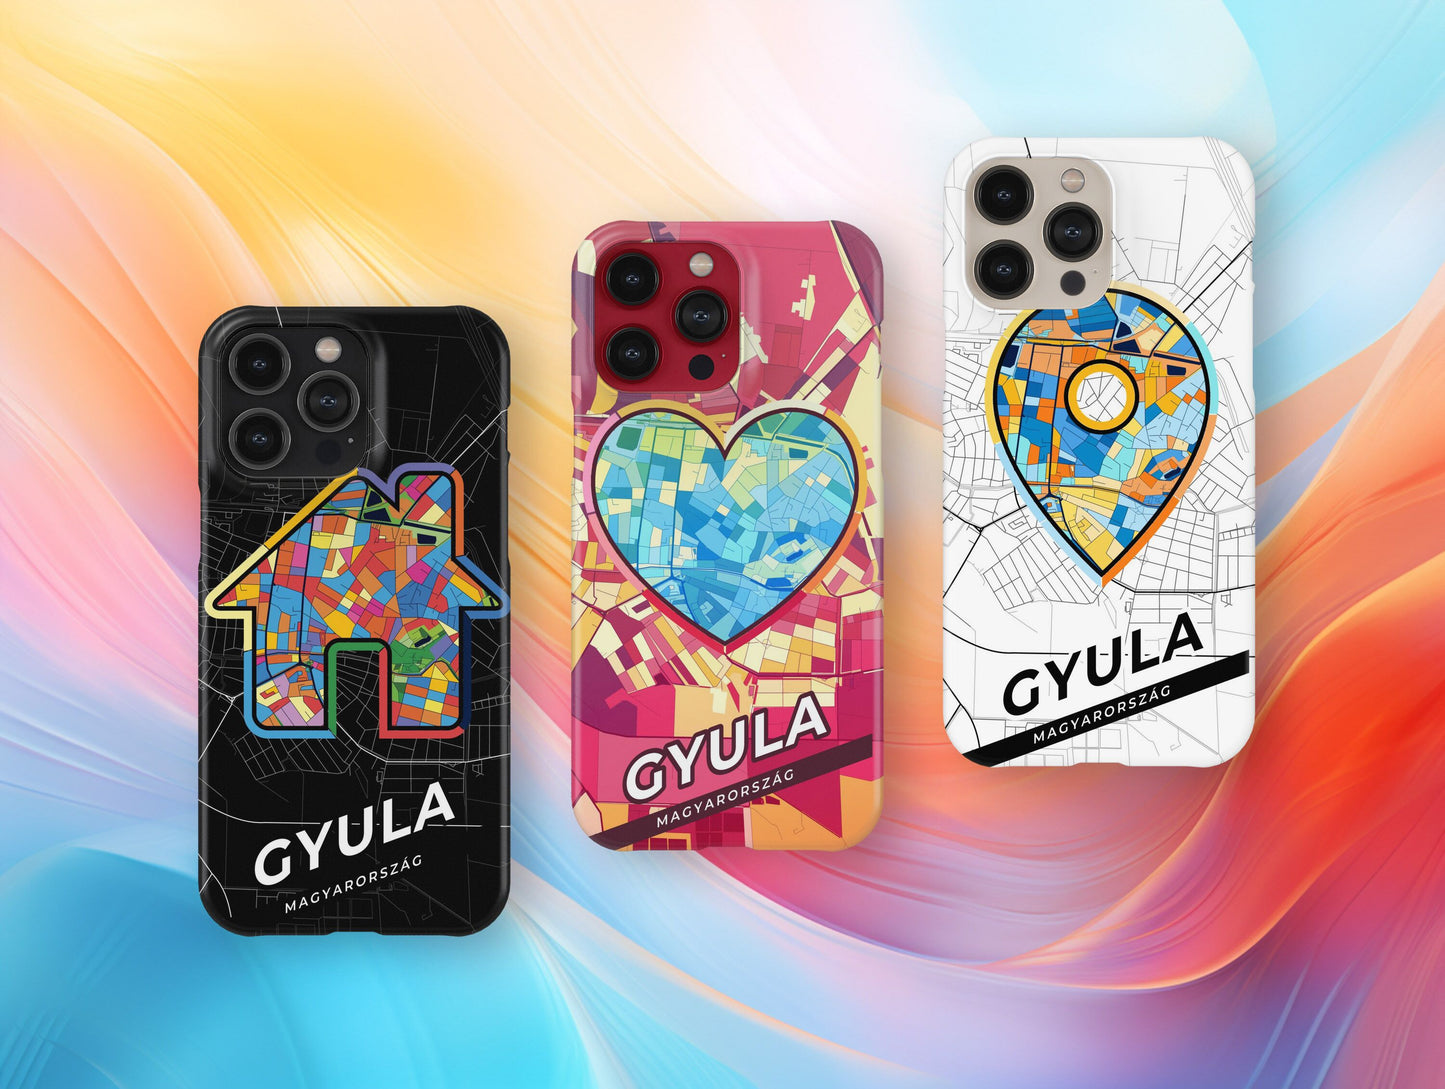 Gyula Hungary slim phone case with colorful icon. Birthday, wedding or housewarming gift. Couple match cases.